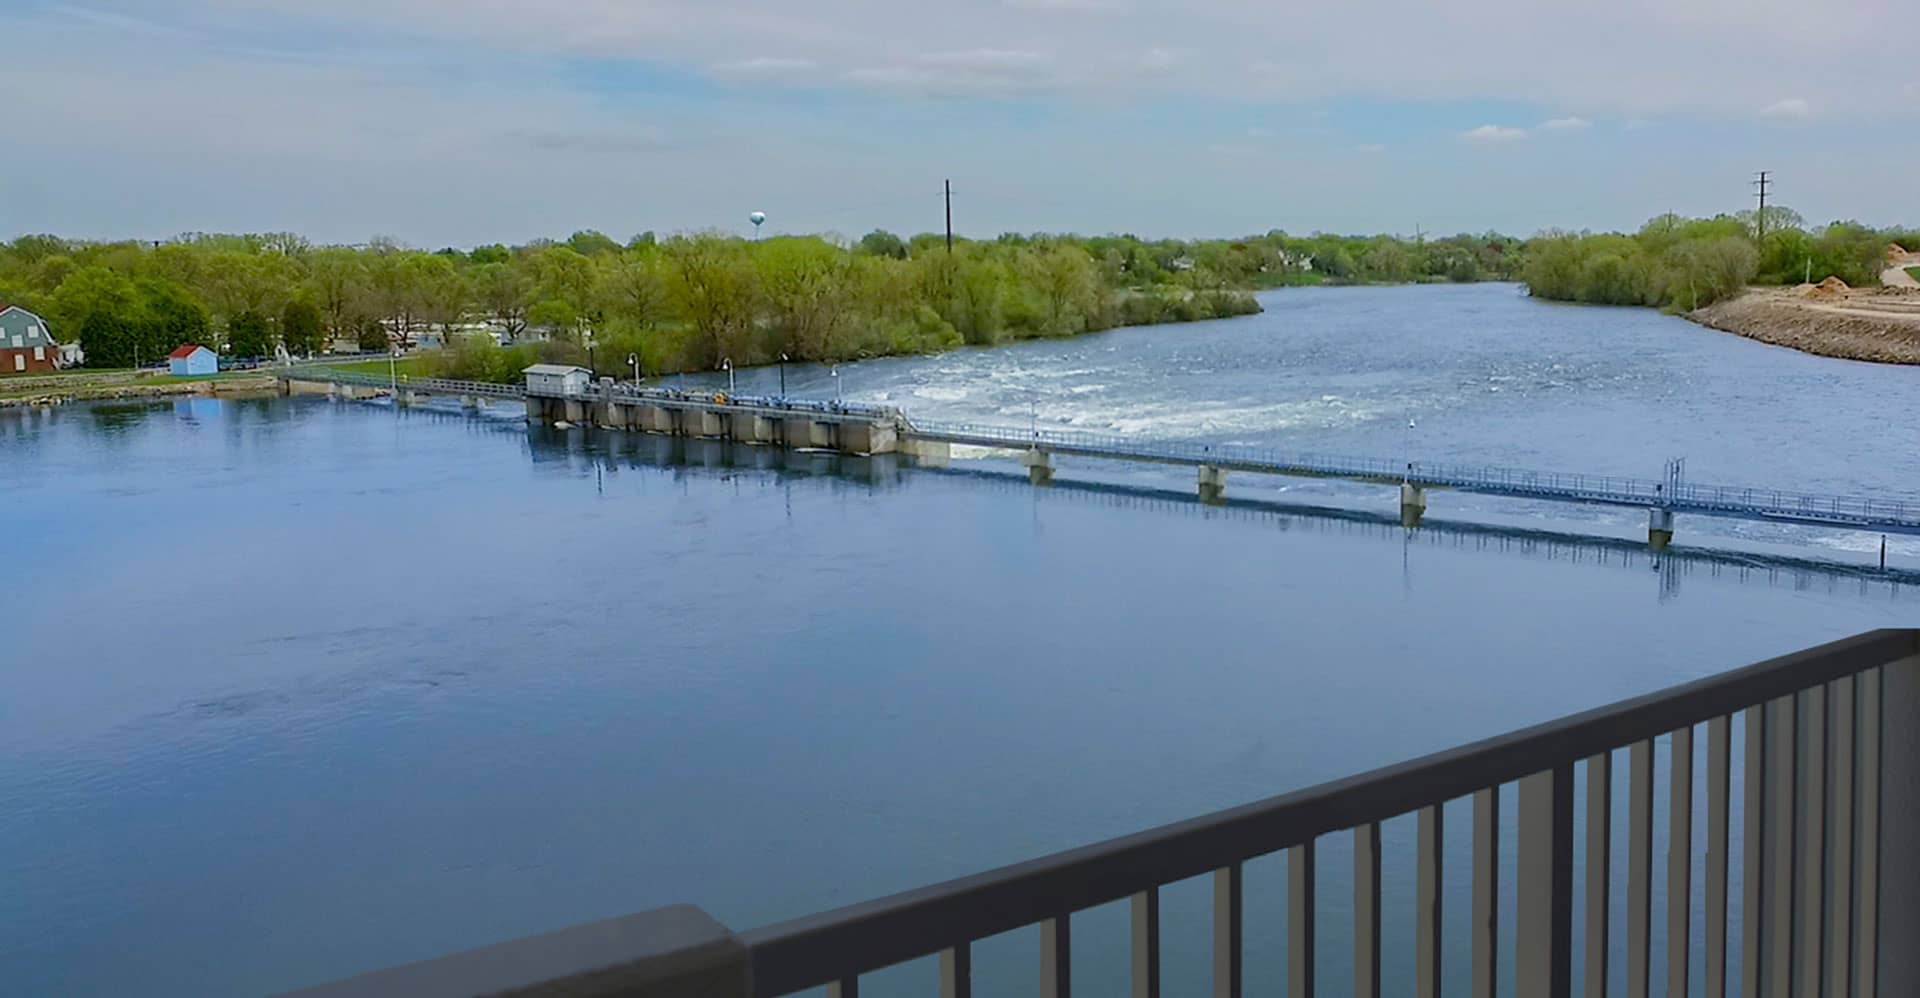 Apartments with 30-foot Balconies Overlooking the Fox River